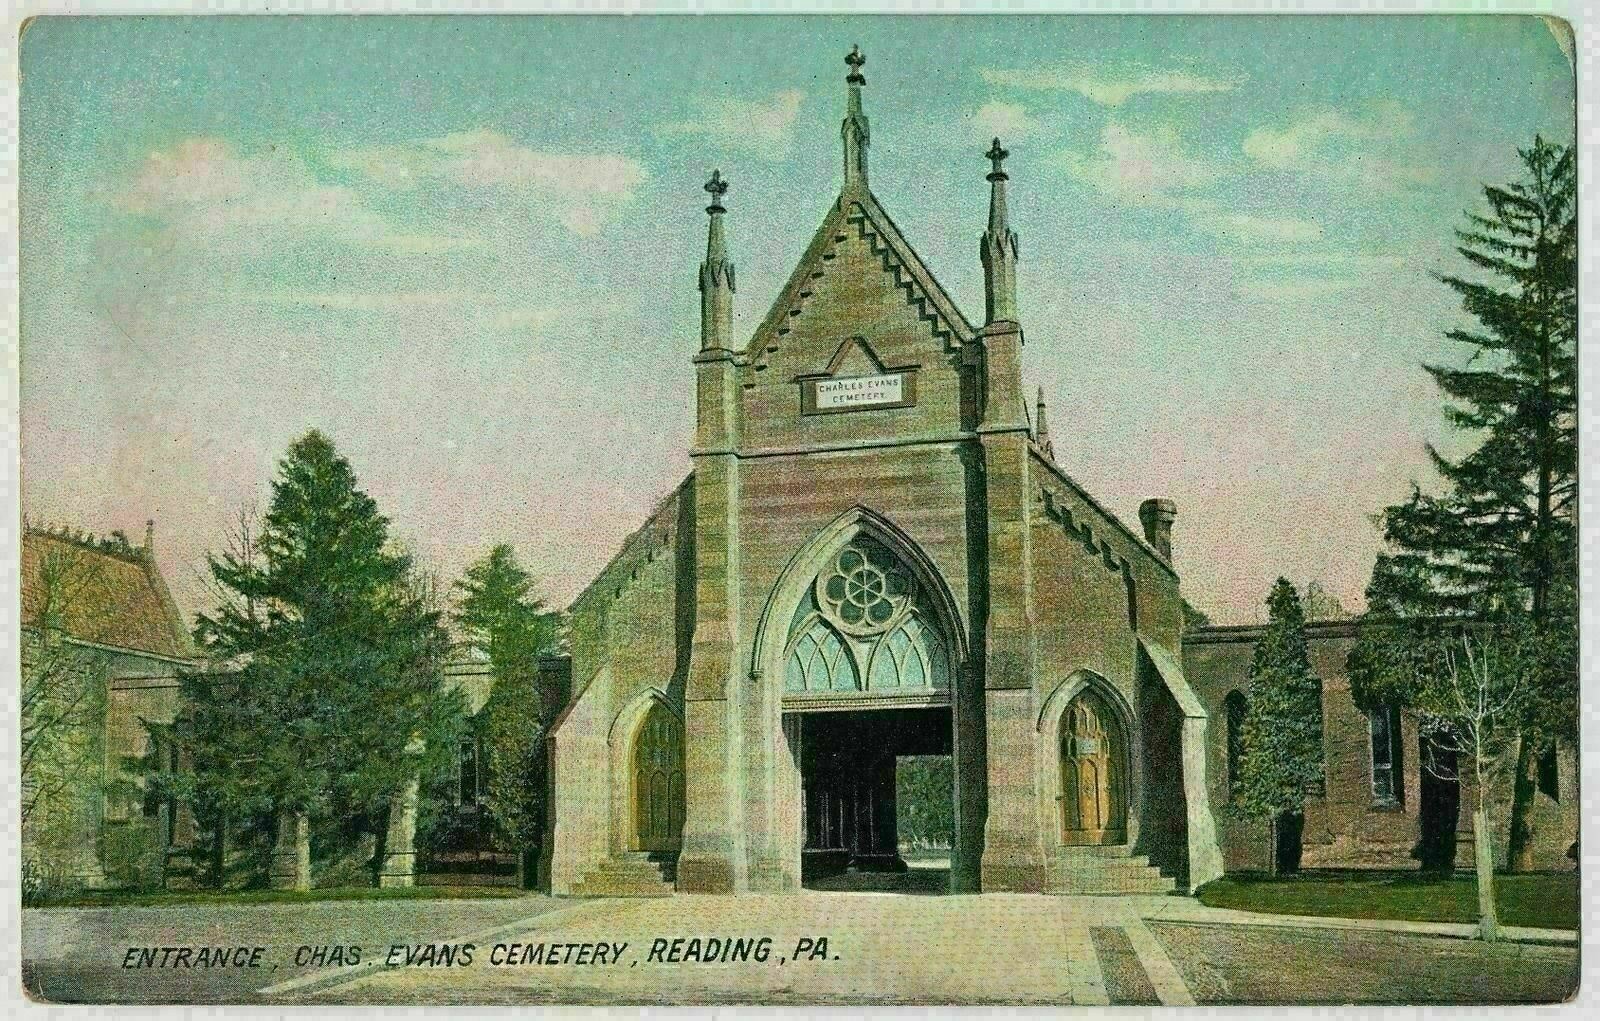 Entrance to Charles Evans Cemetery, Reading, Pennsylvania ca.1910